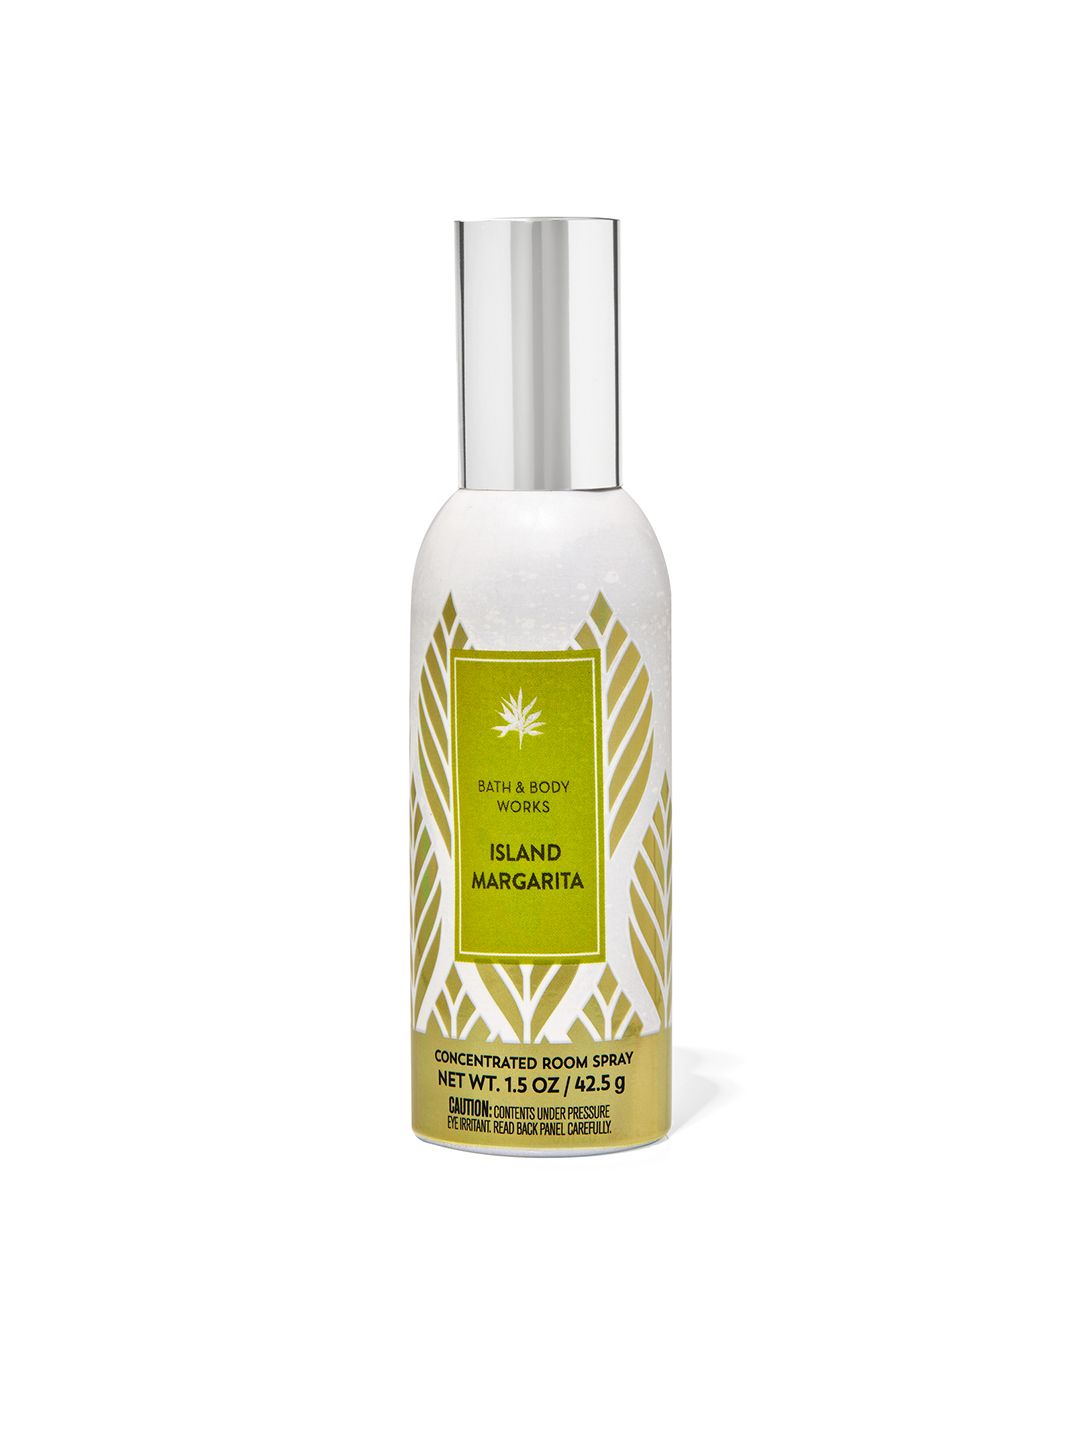 Bath & Body Works Island Margarita Concentrated Room Spray 42.5 g Price in India